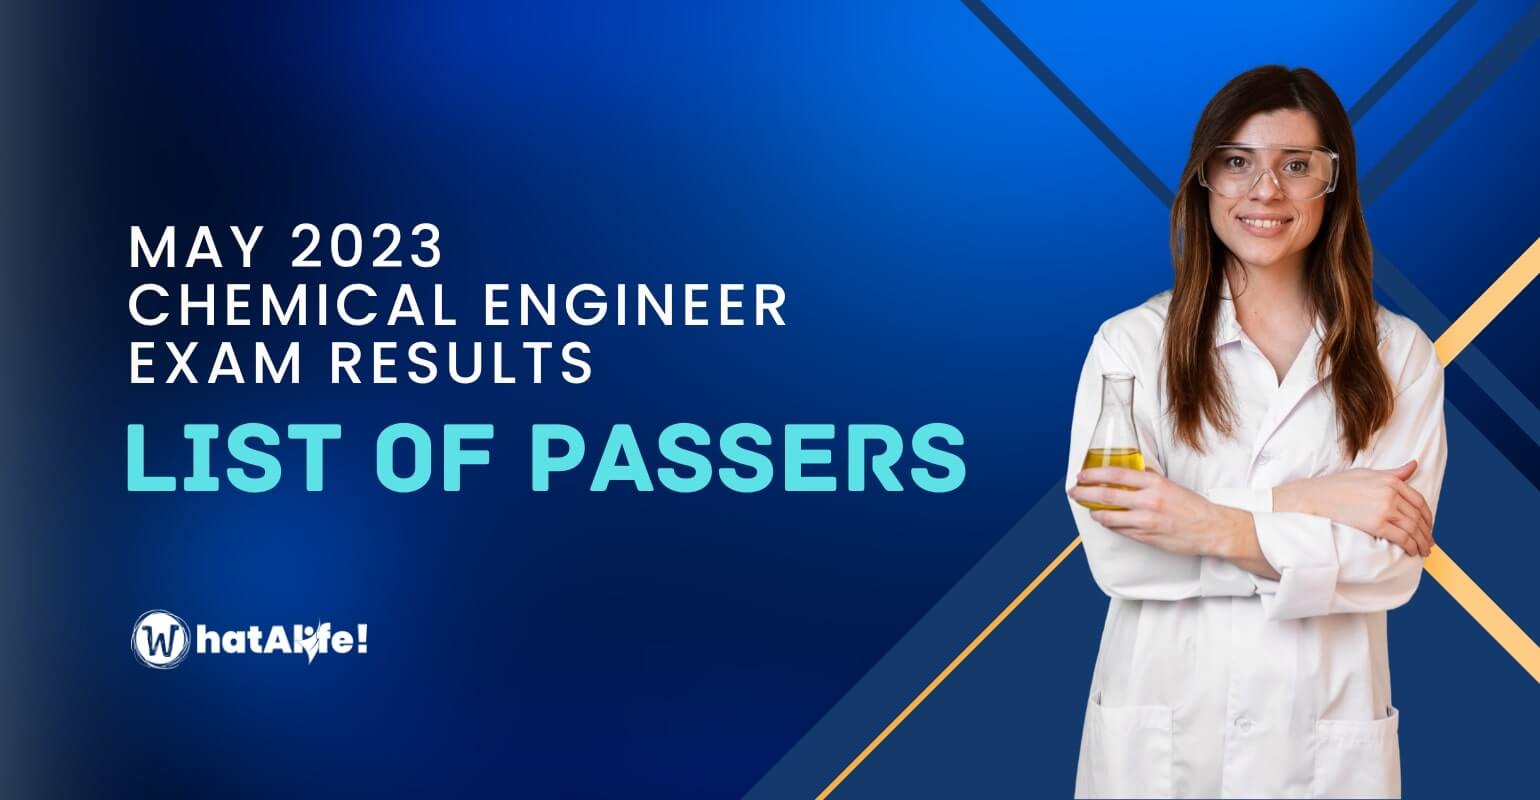 List of Passers — May 2023 Chemical Engineering Licensure Exam